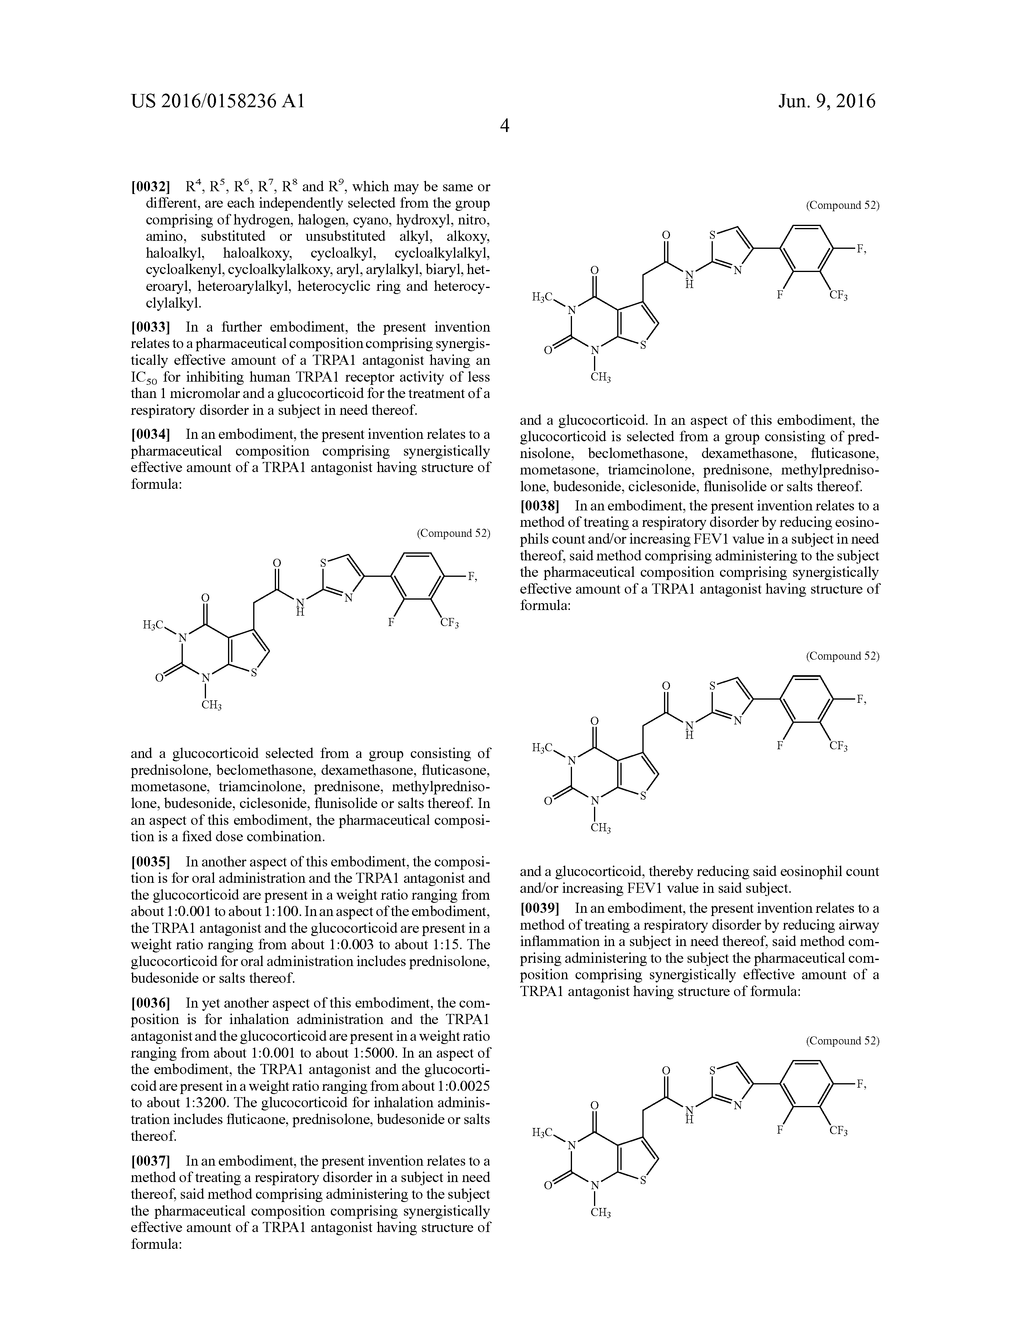 PHARMACEUTICAL COMPOSITION COMPRISING A TRPA1 ANTAGONIST AND A STEROID - diagram, schematic, and image 11